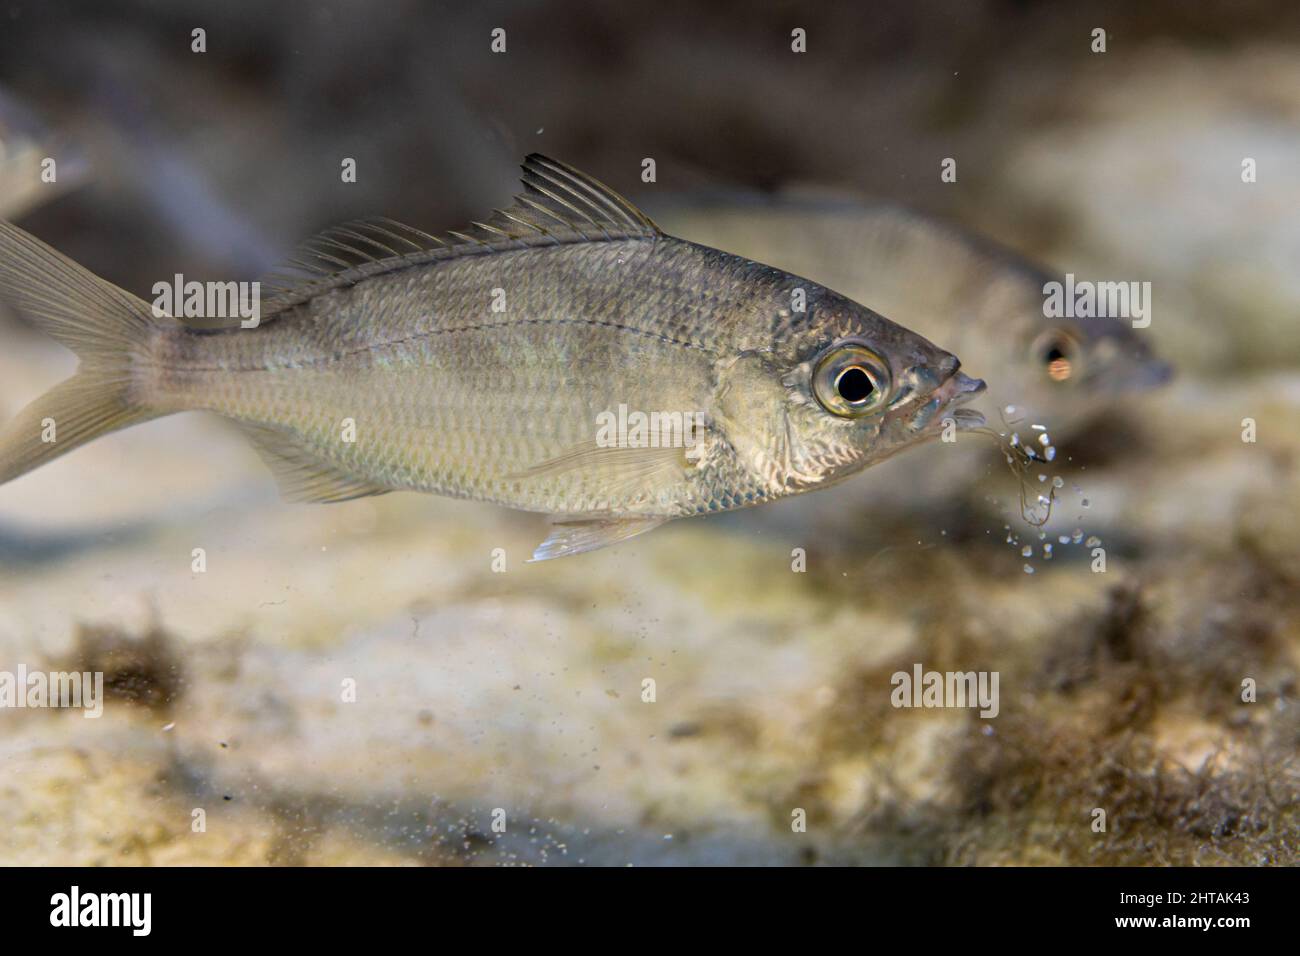 Close-up shot of a wild bait fish called 'Silver Jenny' Mojarra (Eucinostomus harengulus) spitting out sand after probing it for food. Stock Photo